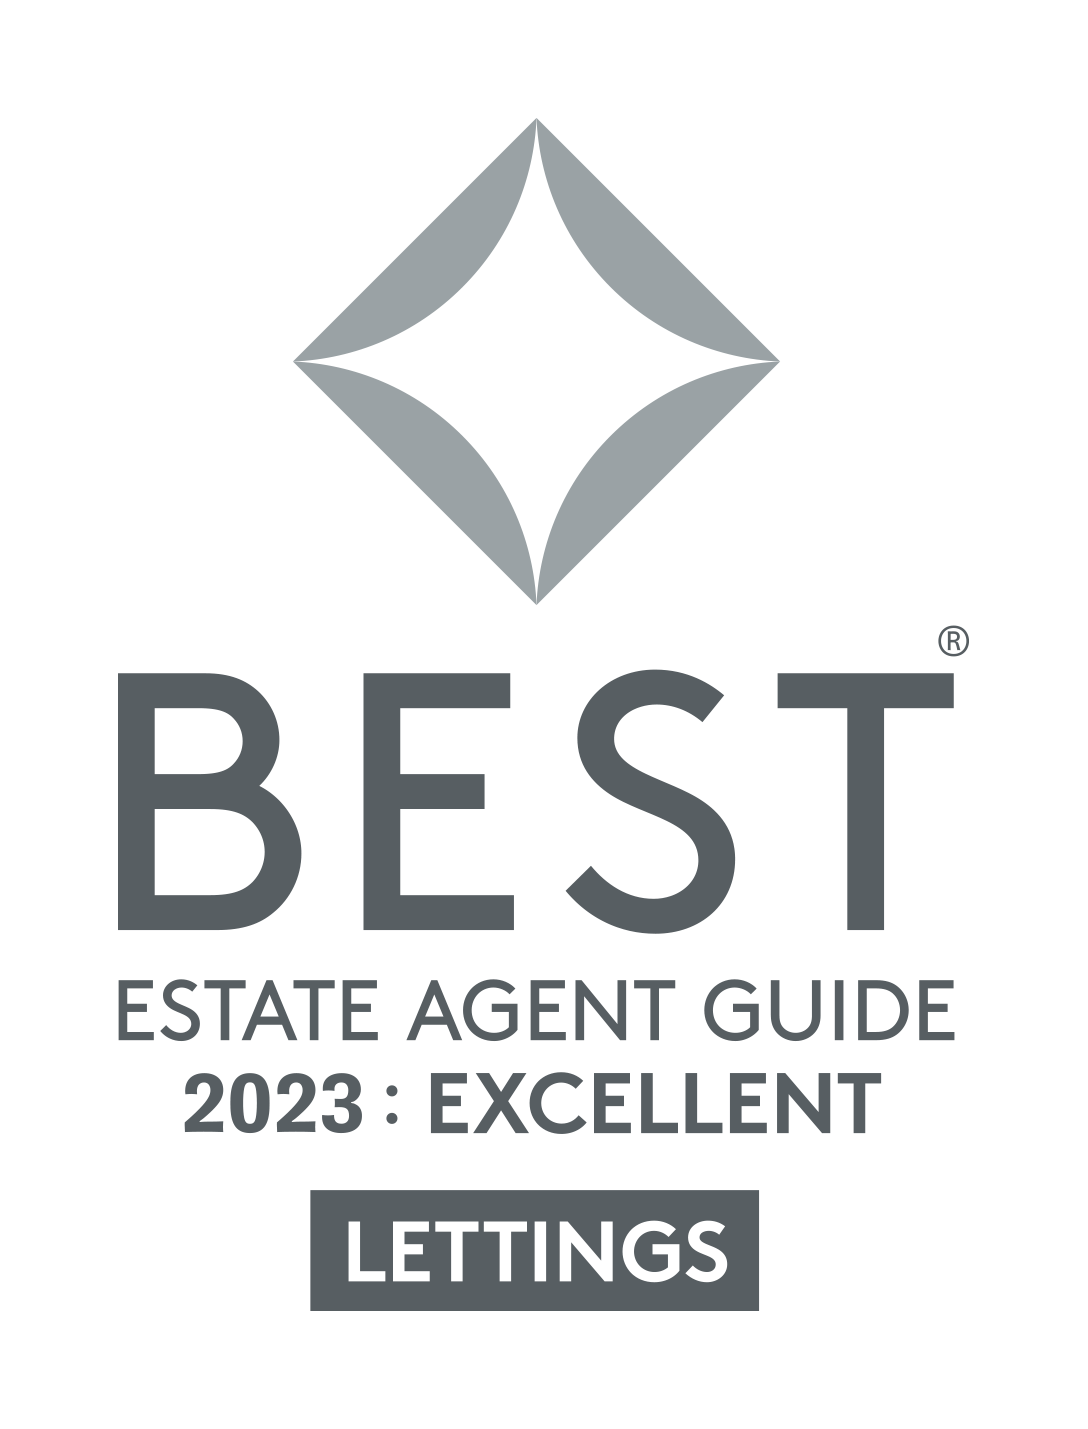 2023 BEAG LETTINGS EXCELLENT